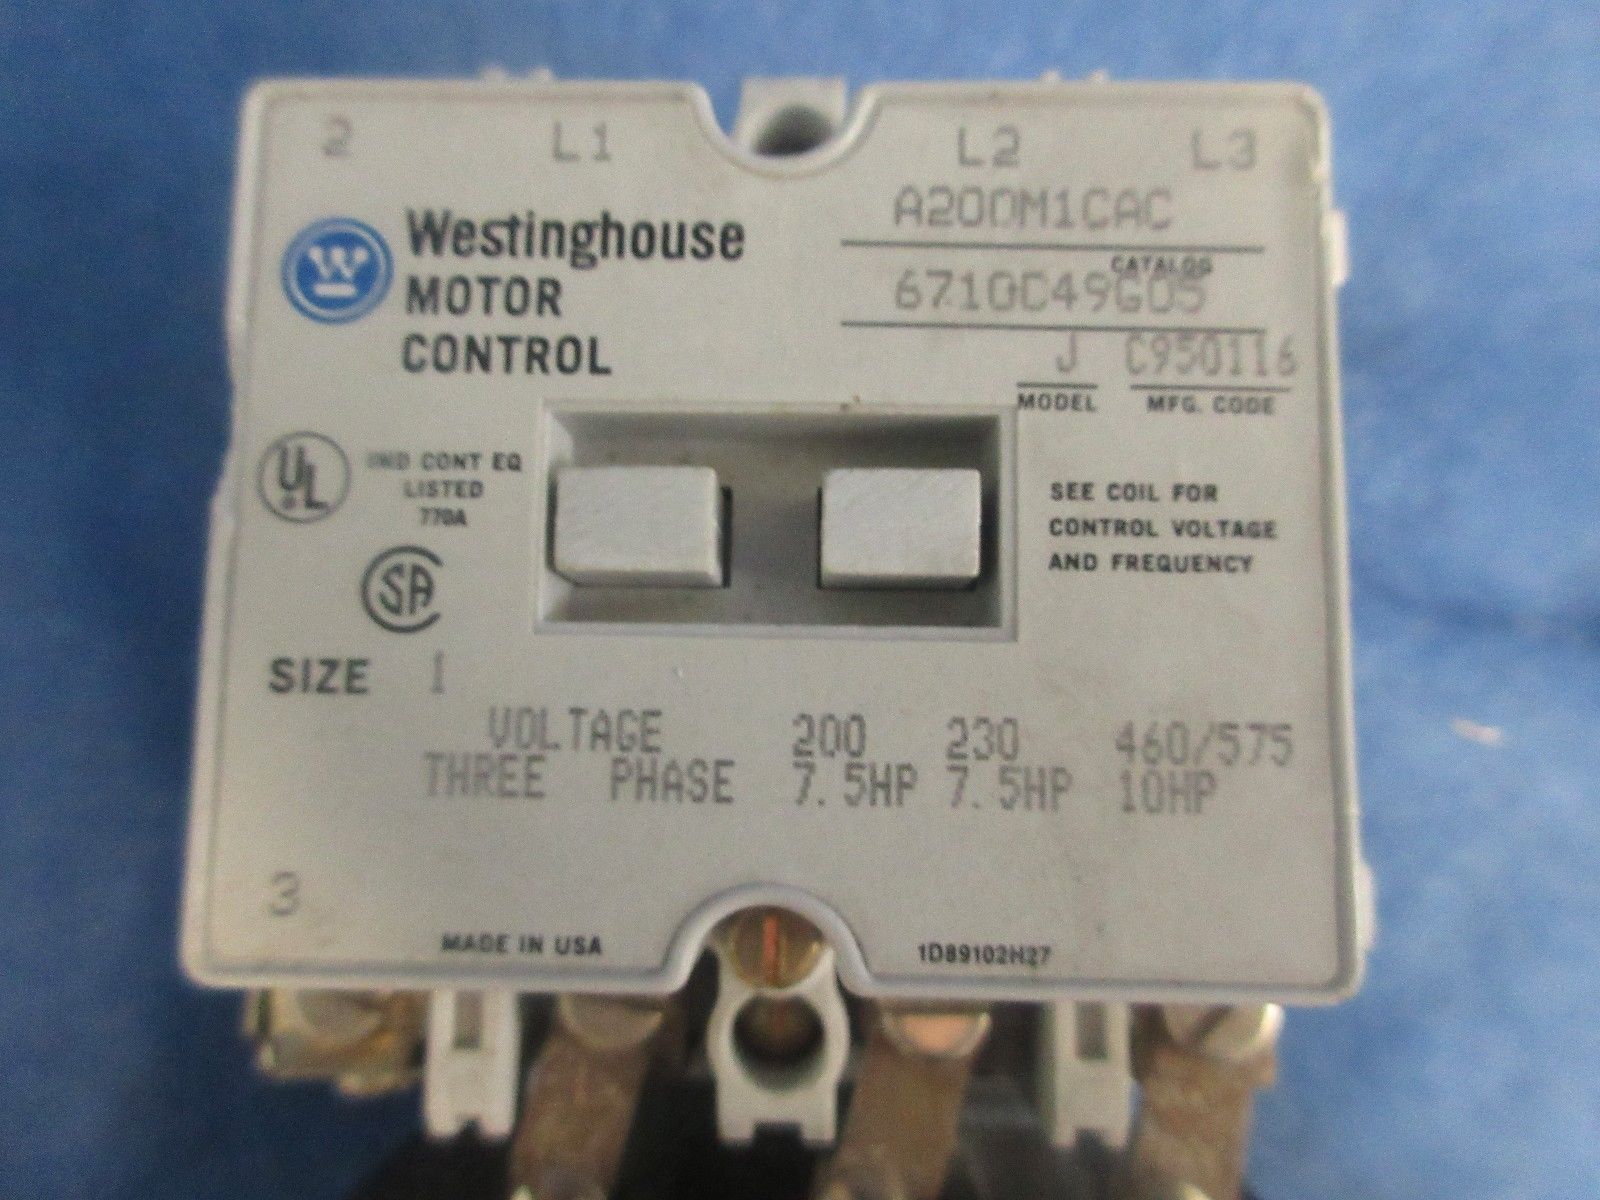 WESTINGHOUSE MODEL J SIZE 1 MOTOR CONTROL A200M1CAC 